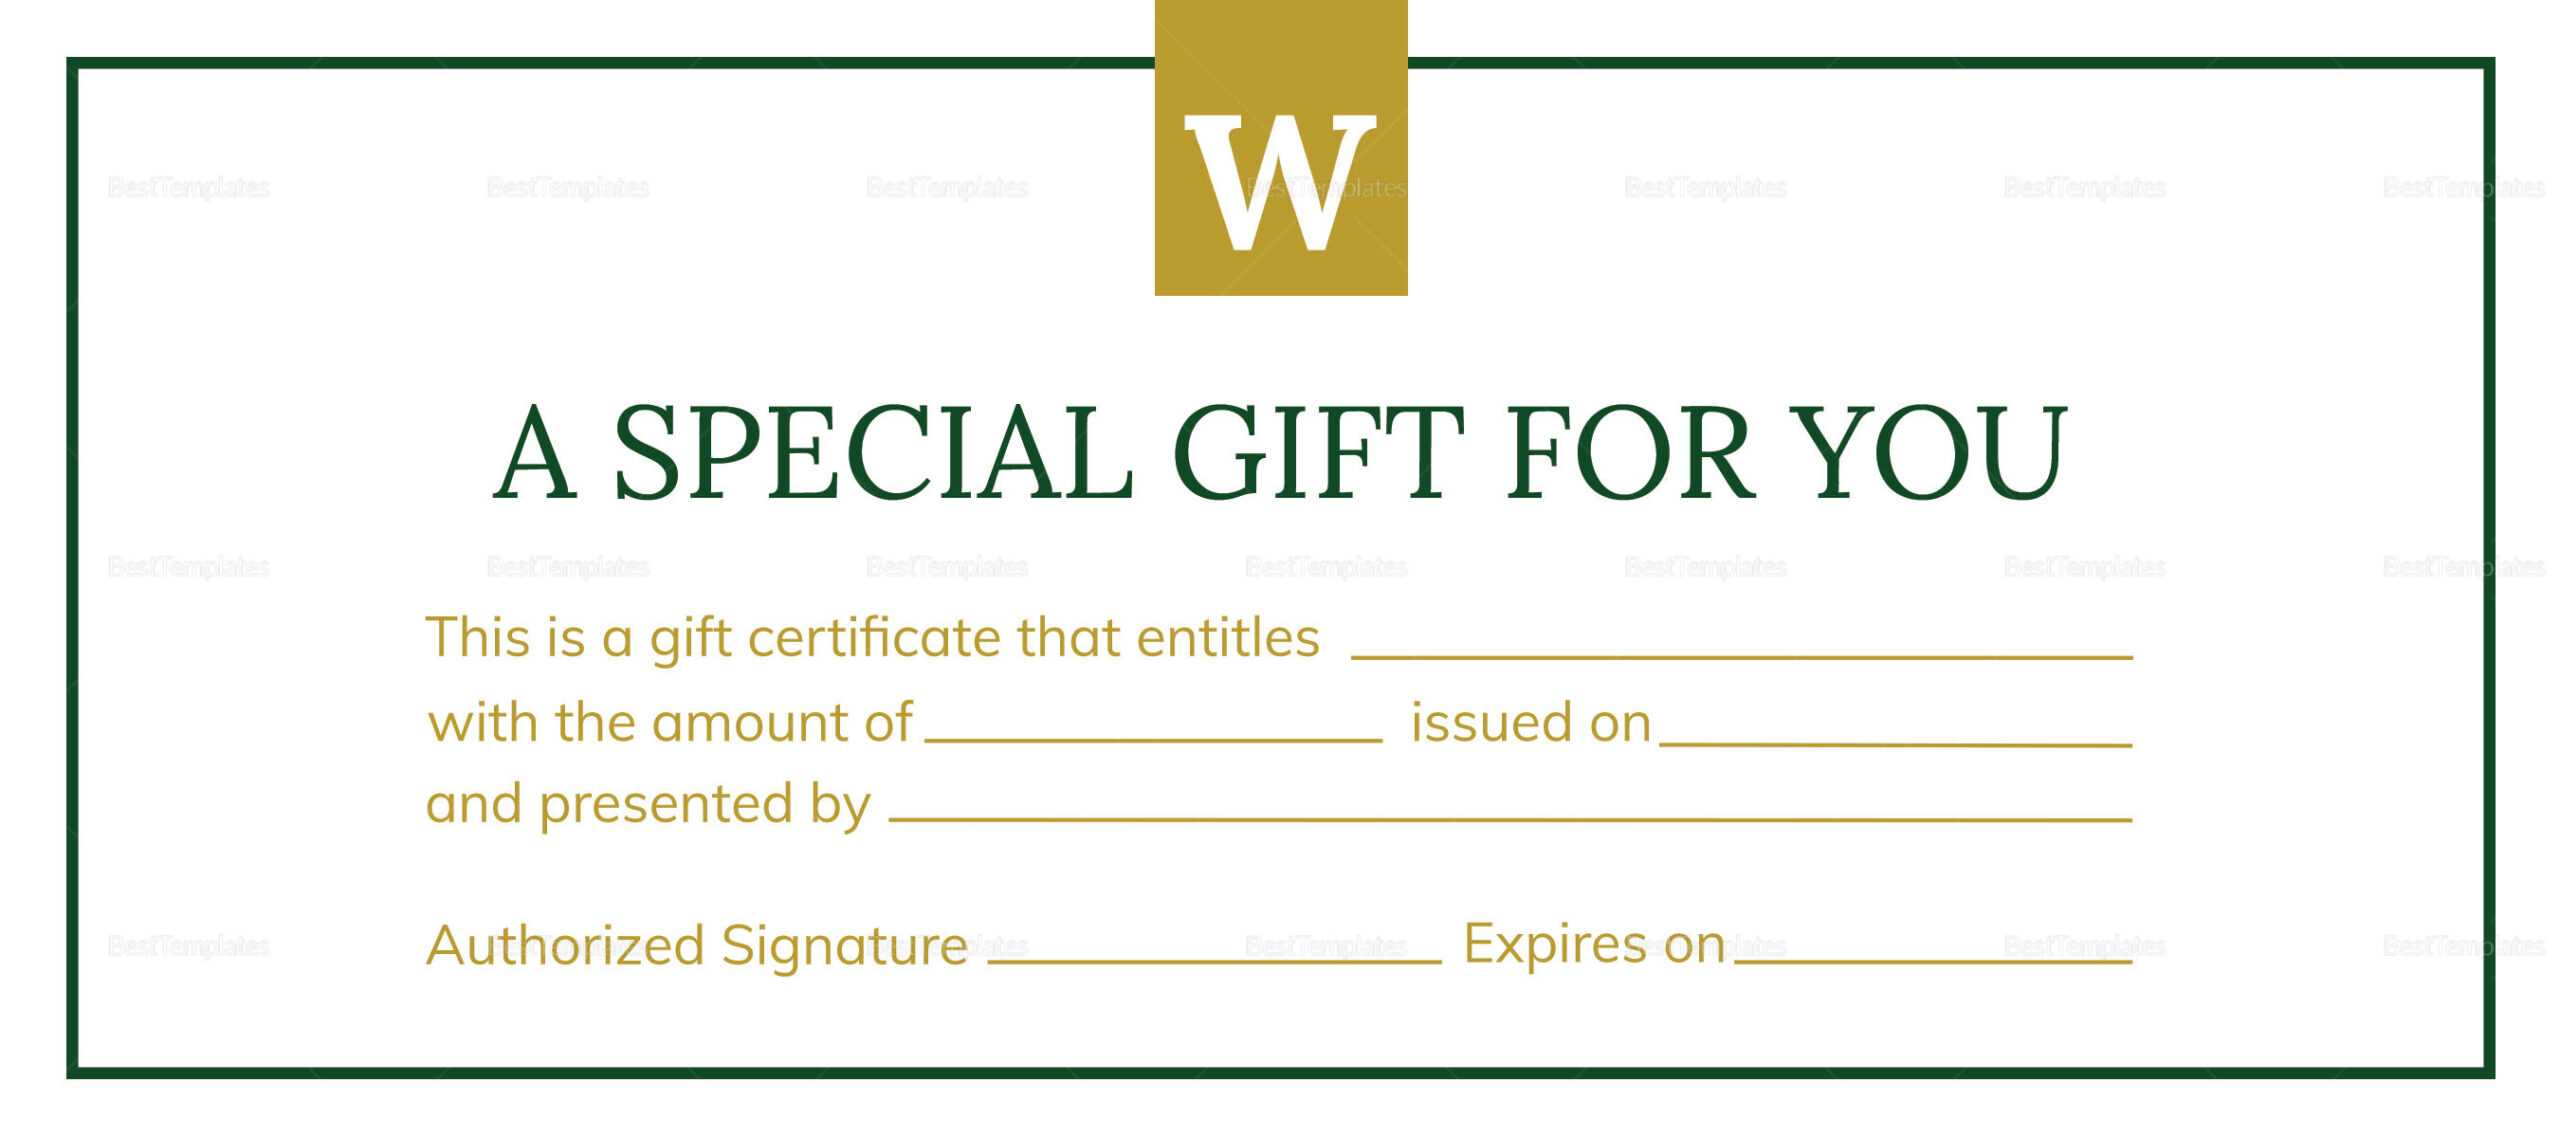 Hotel Gift Certificate Template Throughout Company Gift Certificate Template